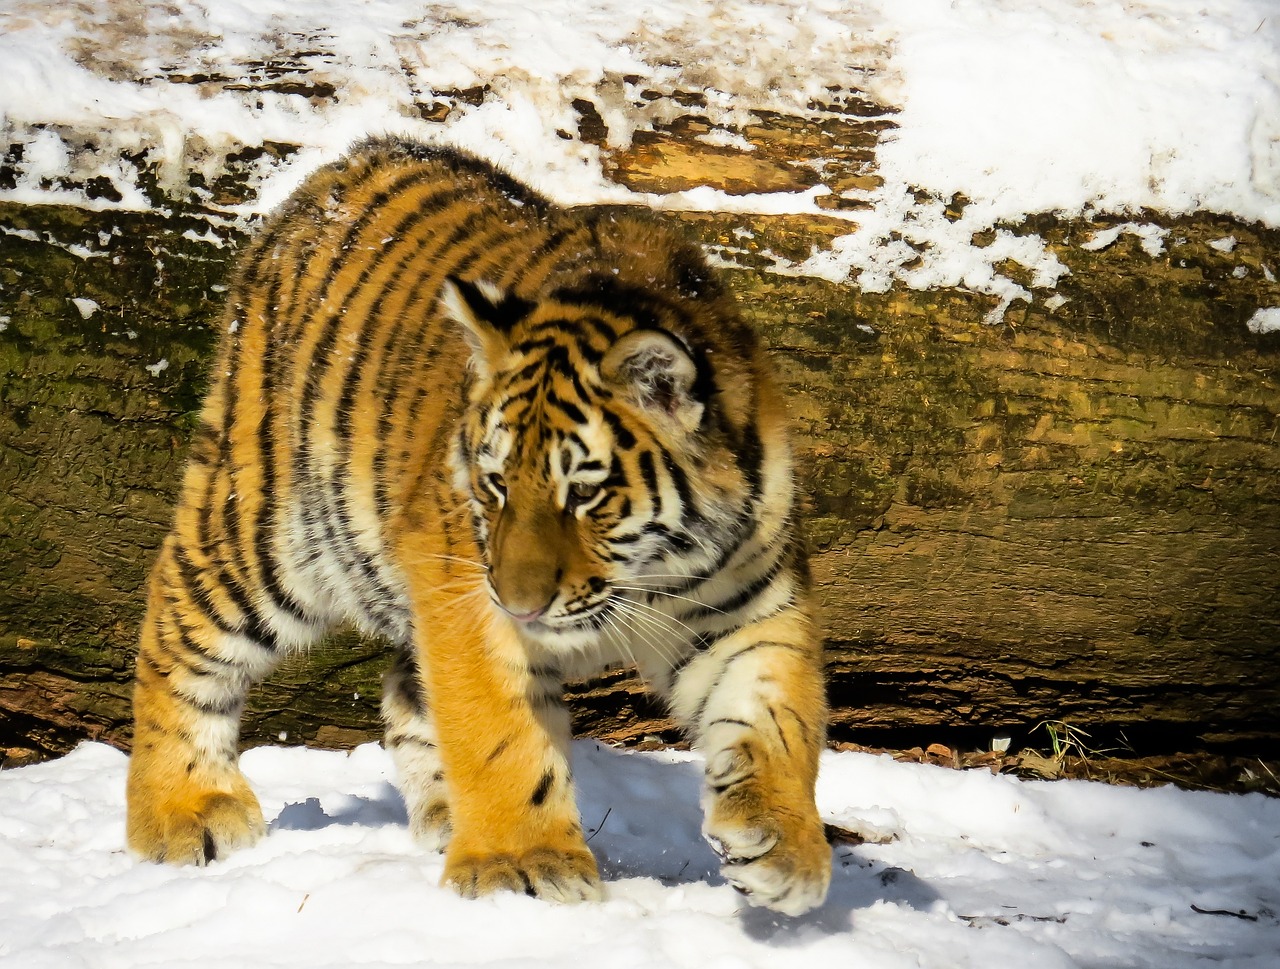 a tiger walking in the snow near a log, a portrait, shutterstock, very sharp photo